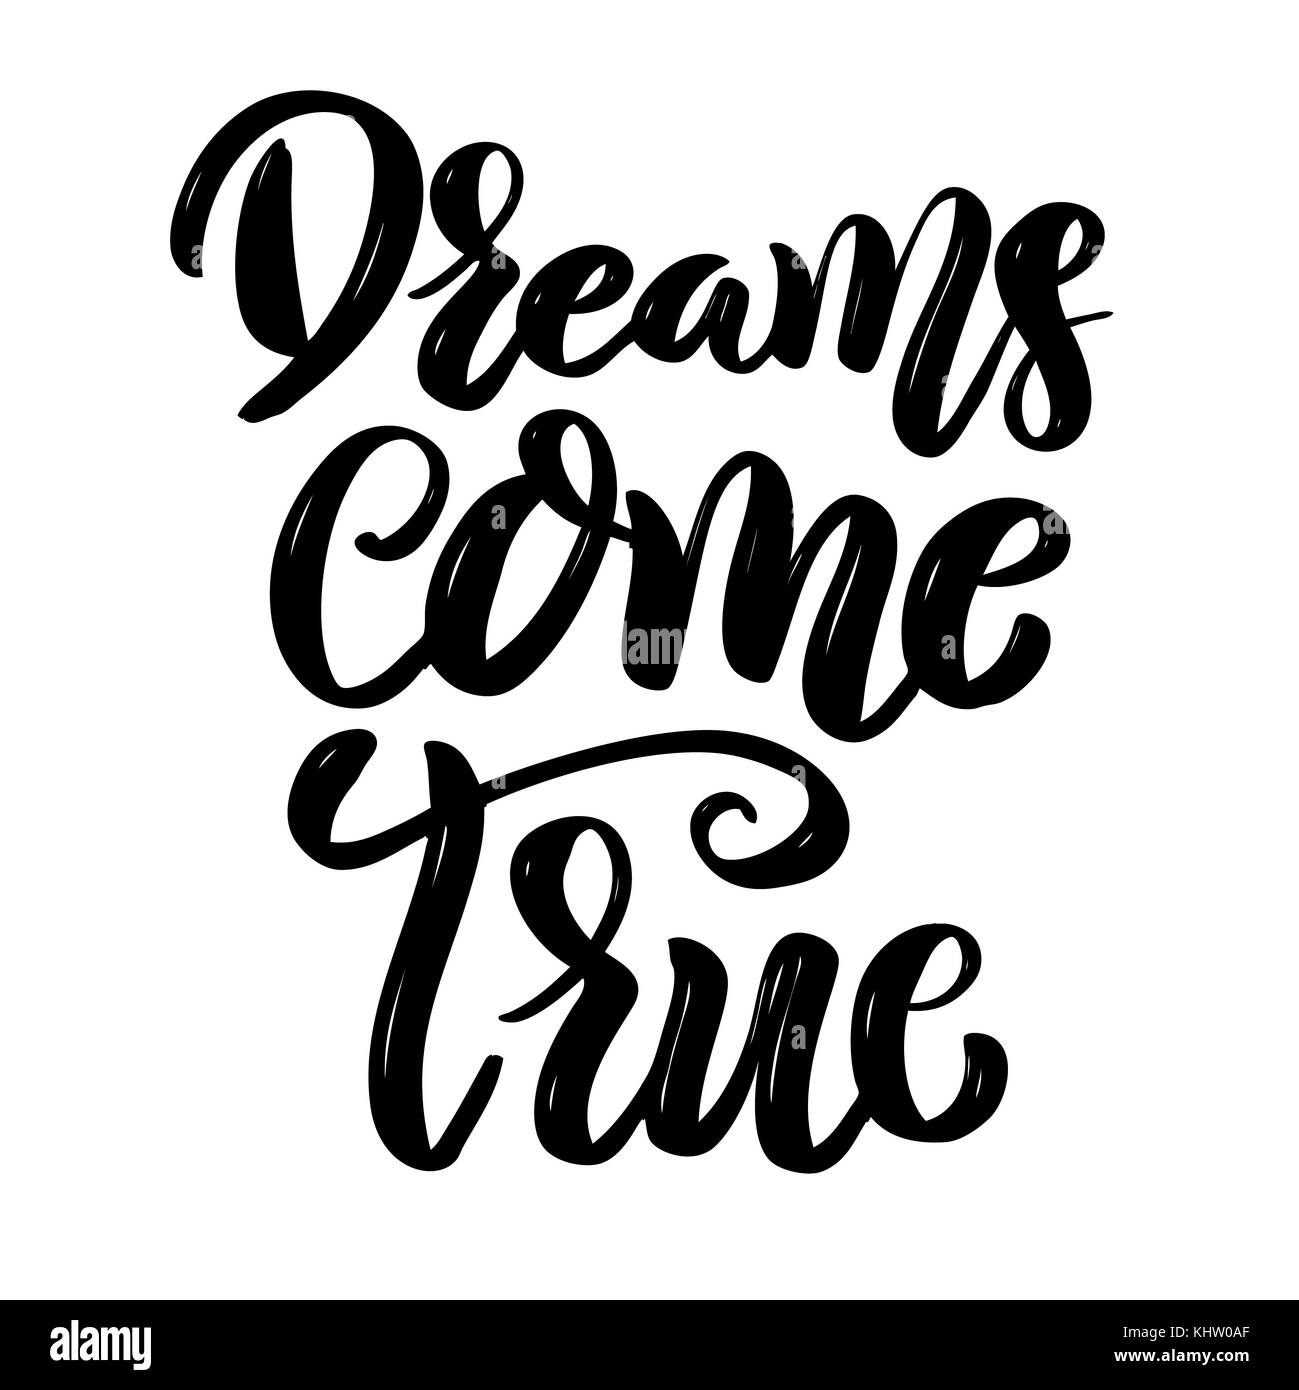 Dreams come true. Hand drawn motivation lettering quote. Design element for poster, banner, greeting card. Vector illustration Stock Photo